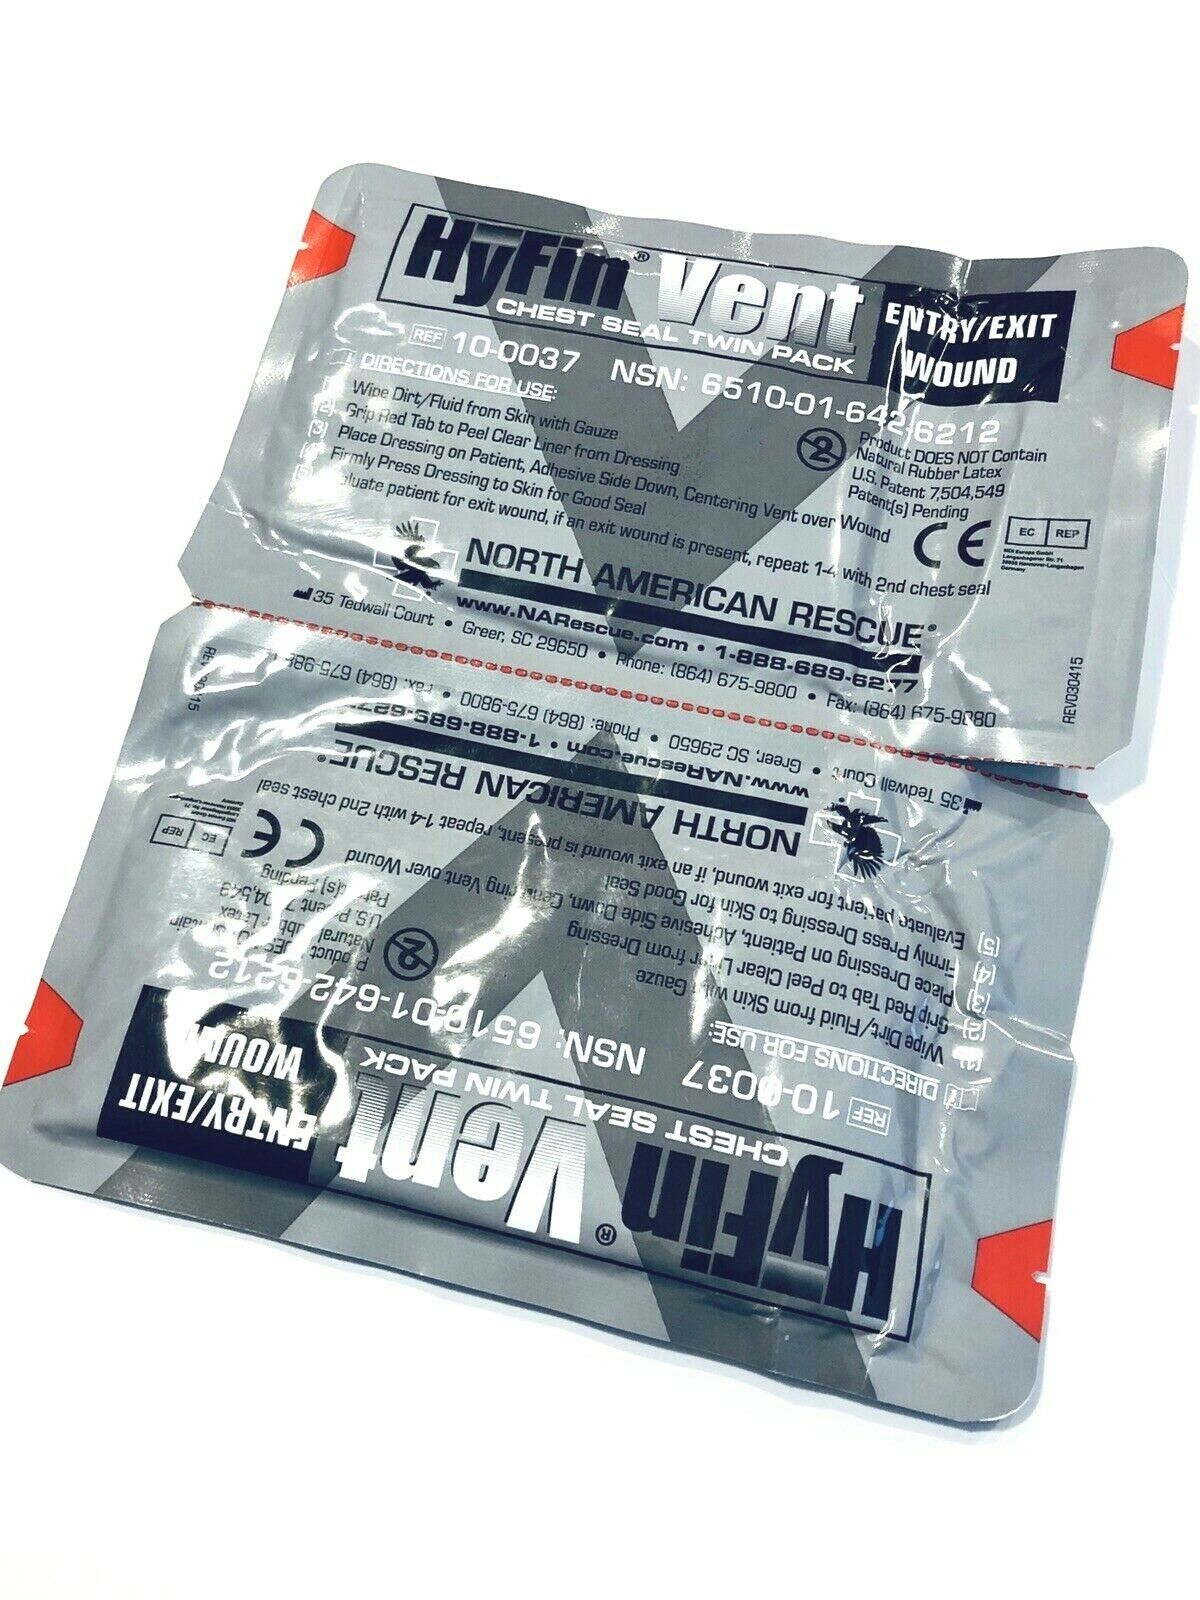 North American Rescue Hyfin Vent Chest Seal Twin Pack New - Exp 2022 & 2023